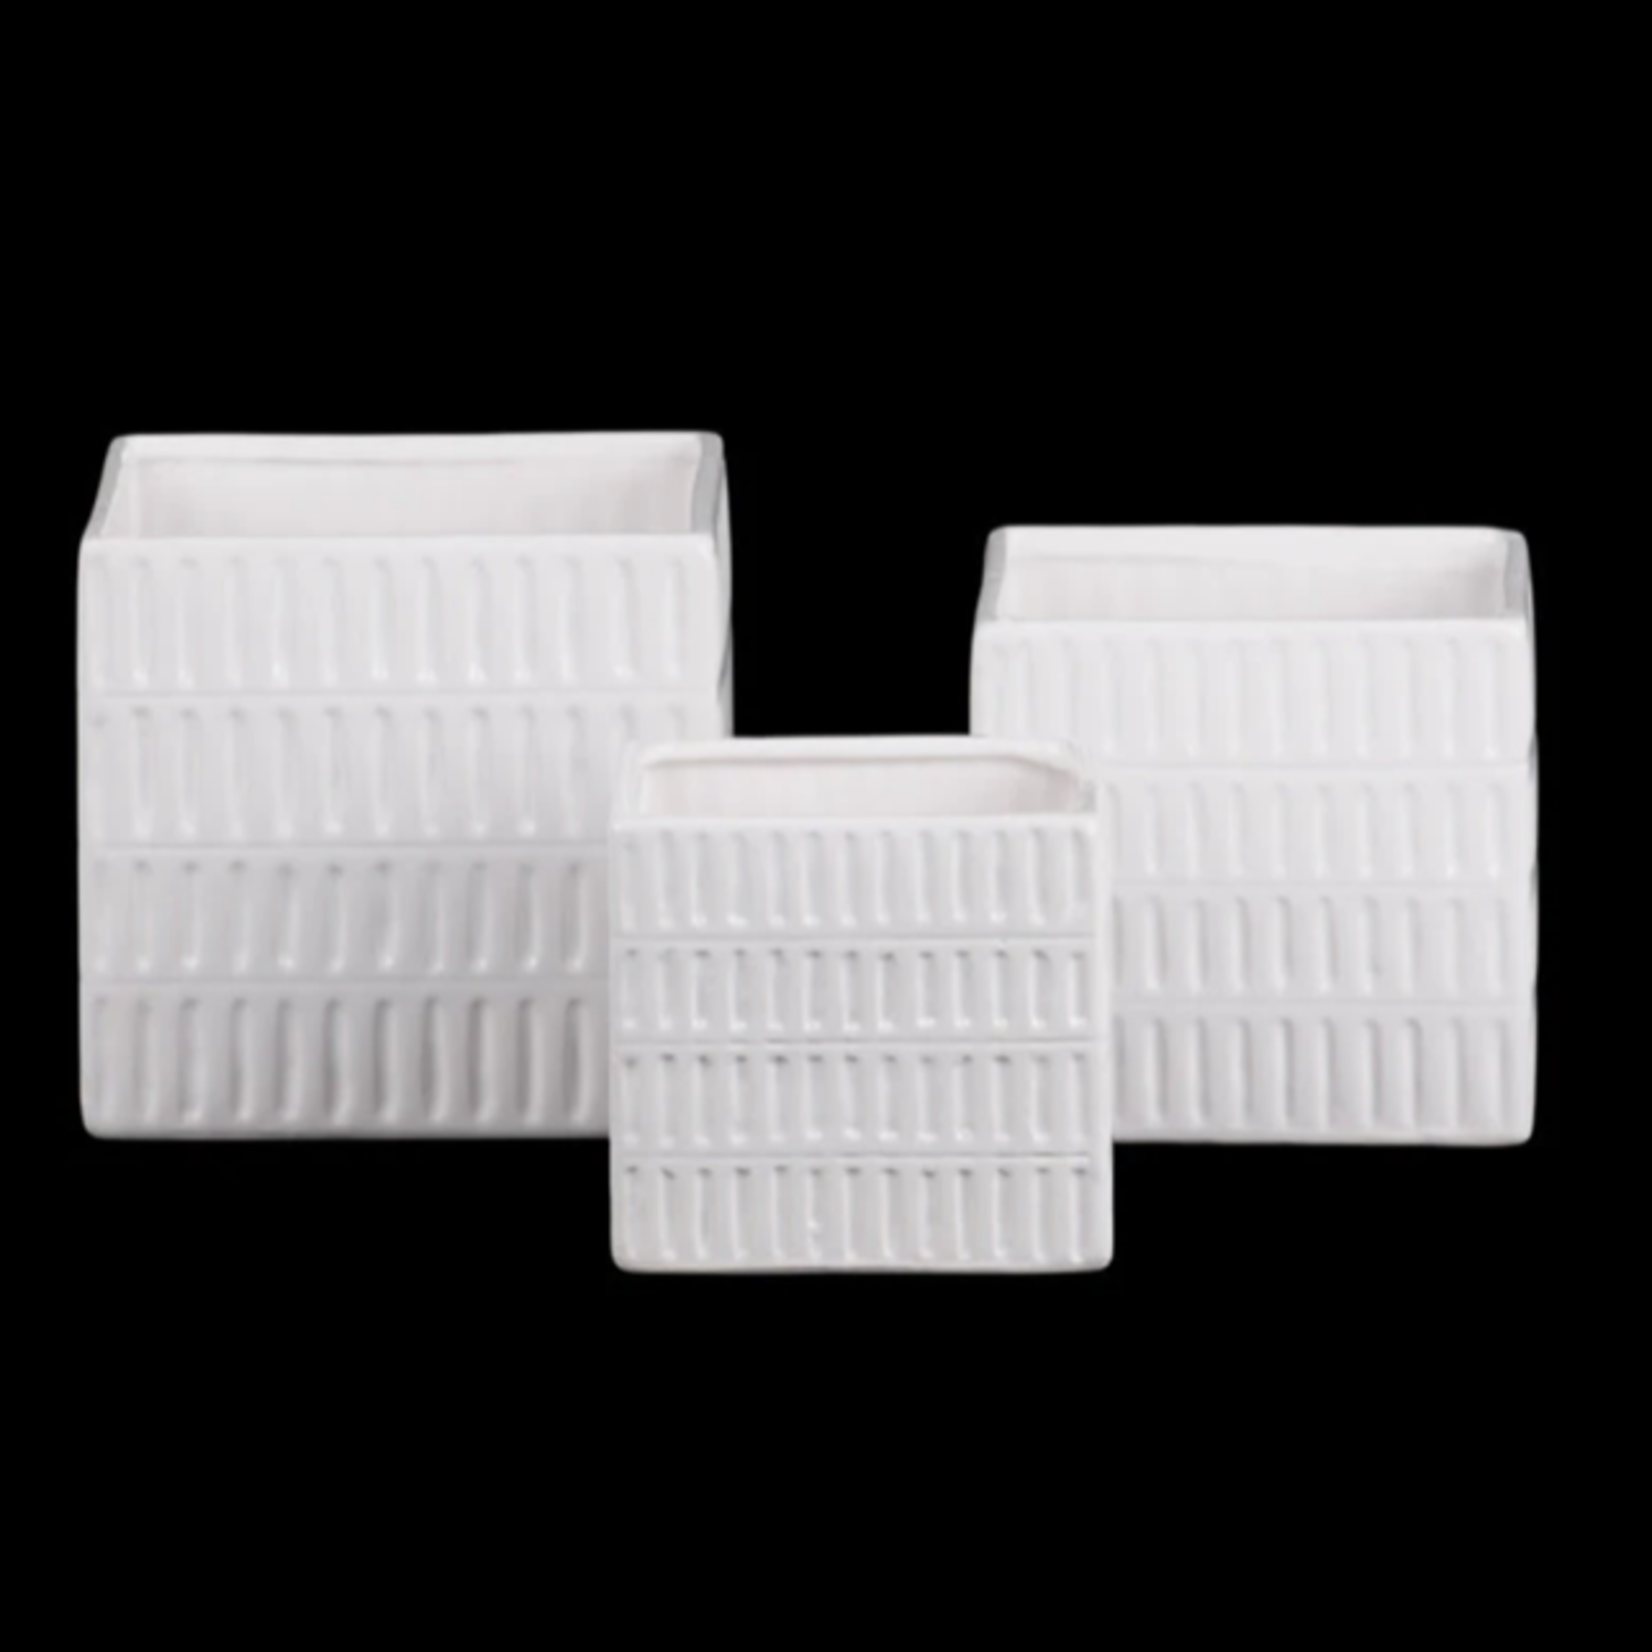 5”H X 5.25” X 5.25” MEDIUM WHITE Ceramic Square Pot with 4 Tier Embossed Oblong Lattice Design Body and Tapered Bottom